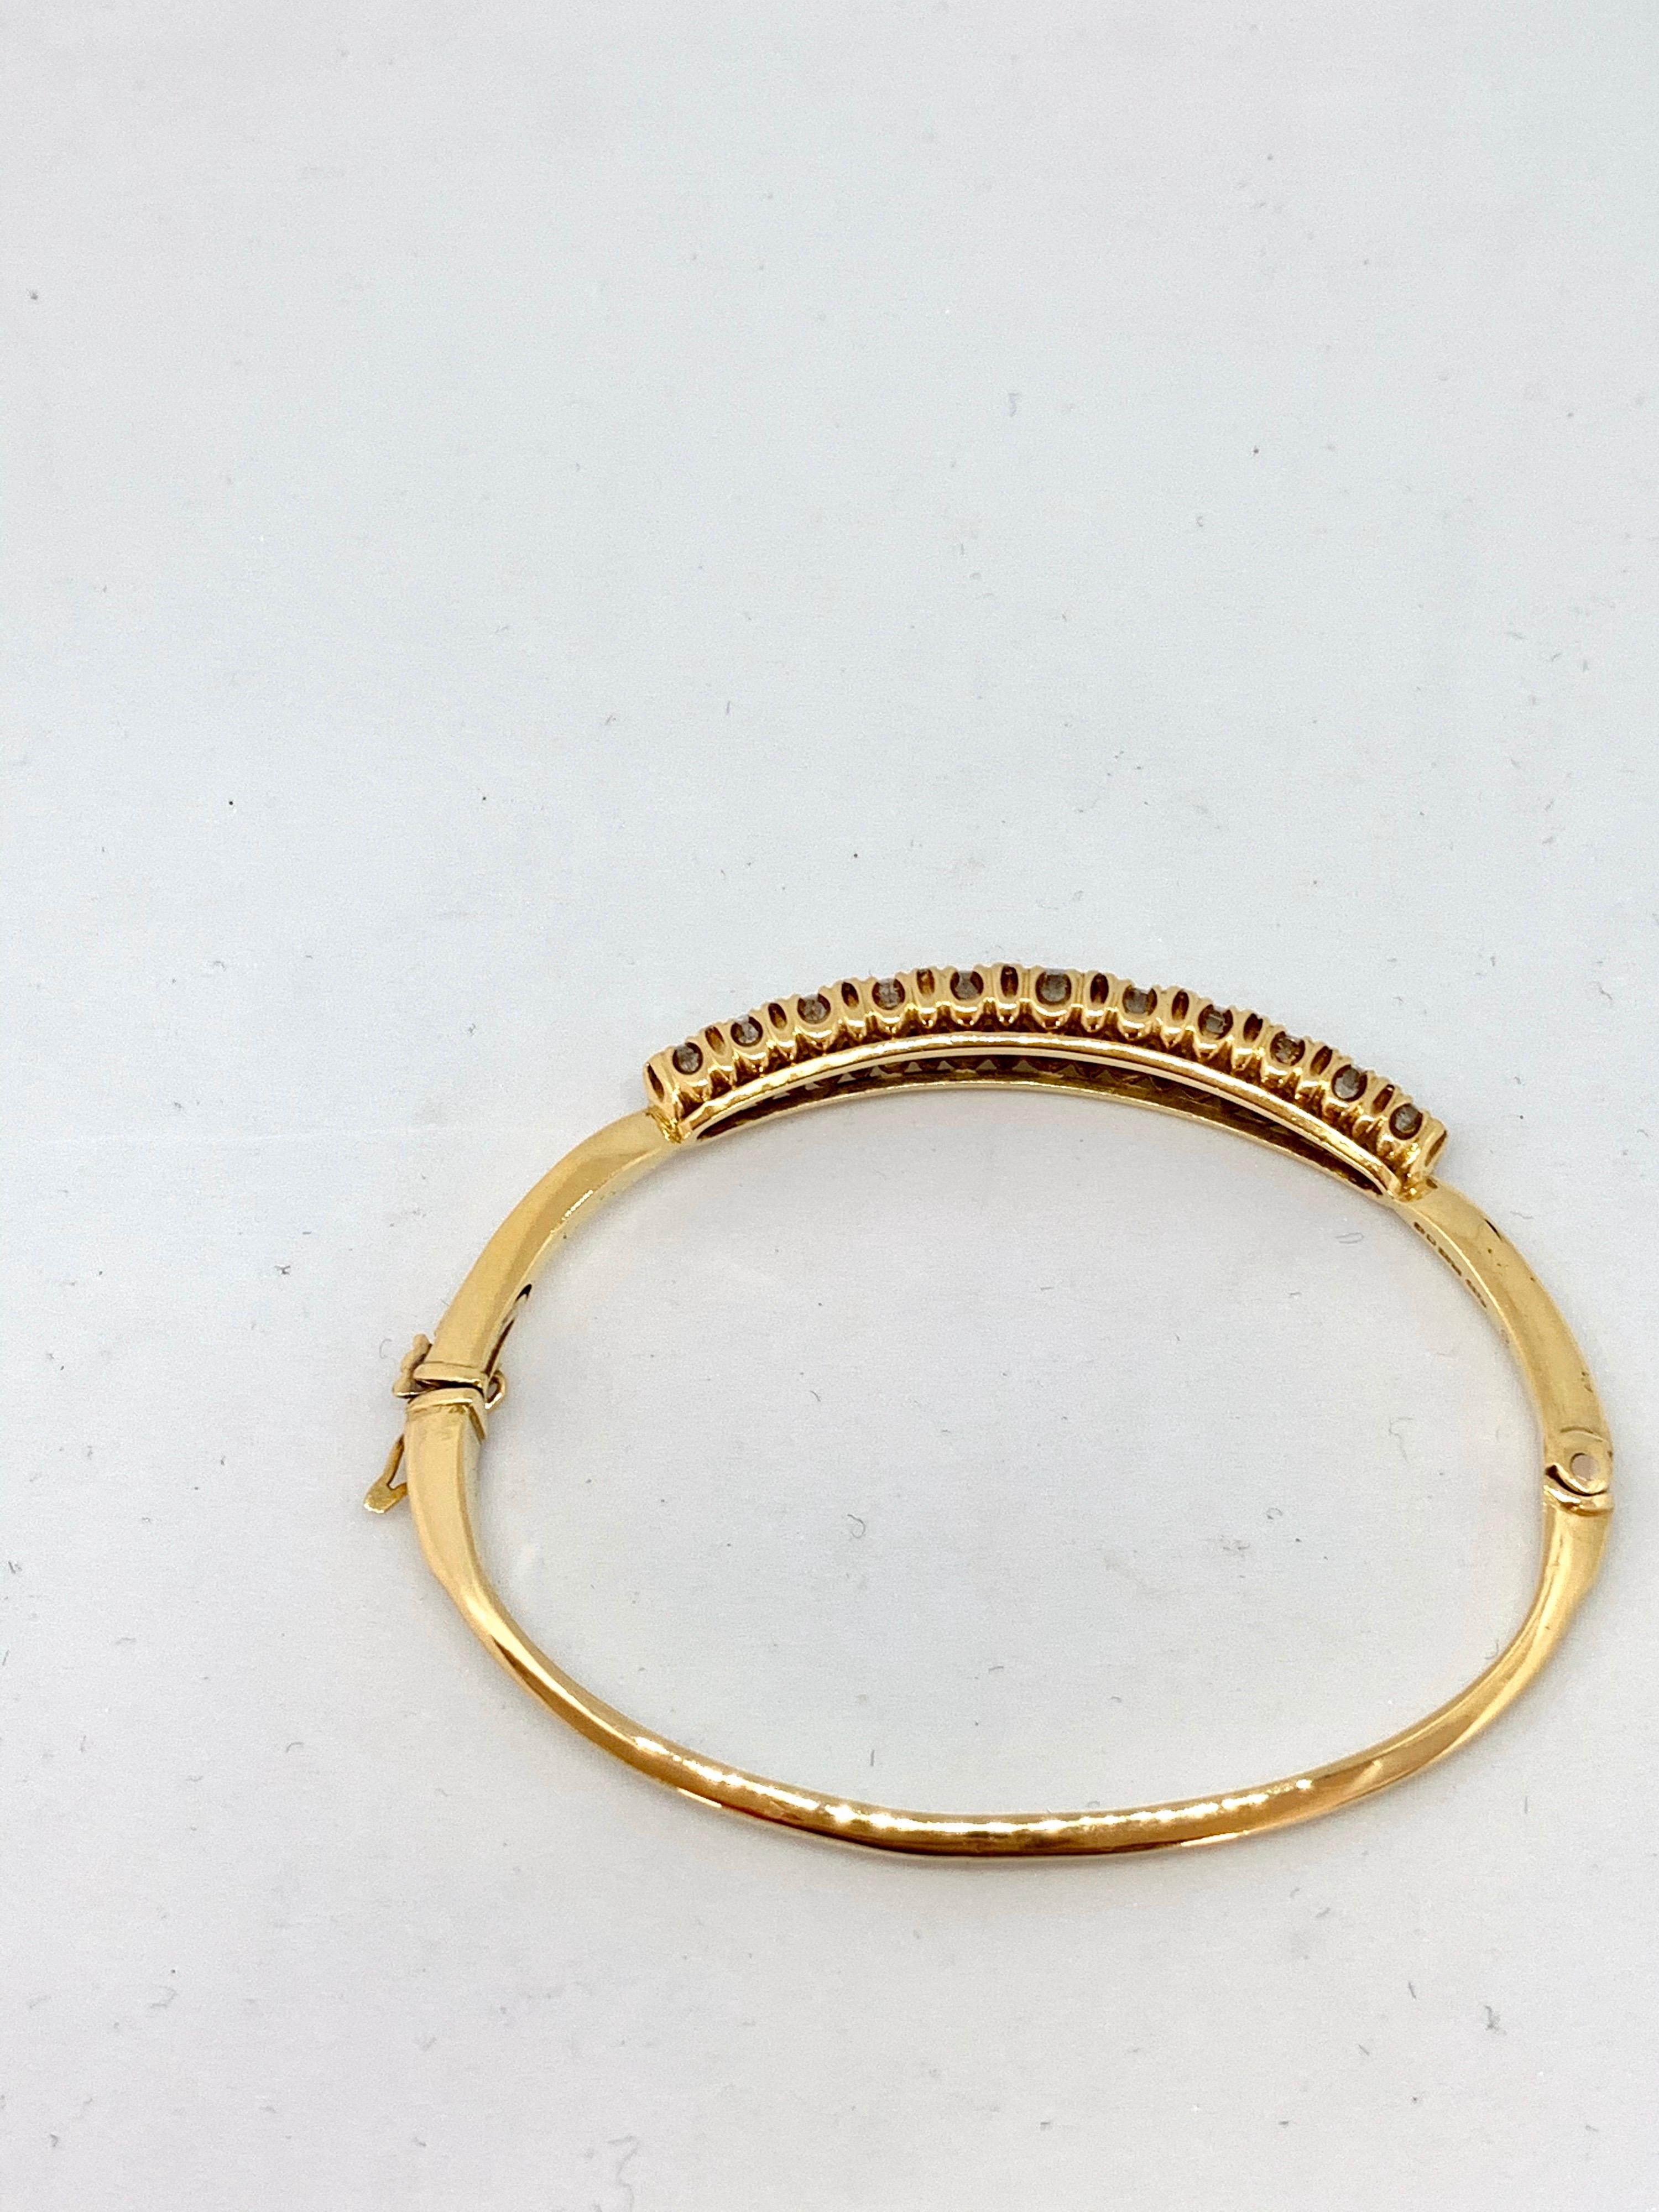 18ct yellow gold Victorian style hinged diamond set bangle. 1974 London assay mark J&P sponsor.
Solid oval hinged bangle inside dimensions -60.0mm length x 46.0mm width
Centre graduated claw set diamond section45.0mm length x 7.50mm width in the